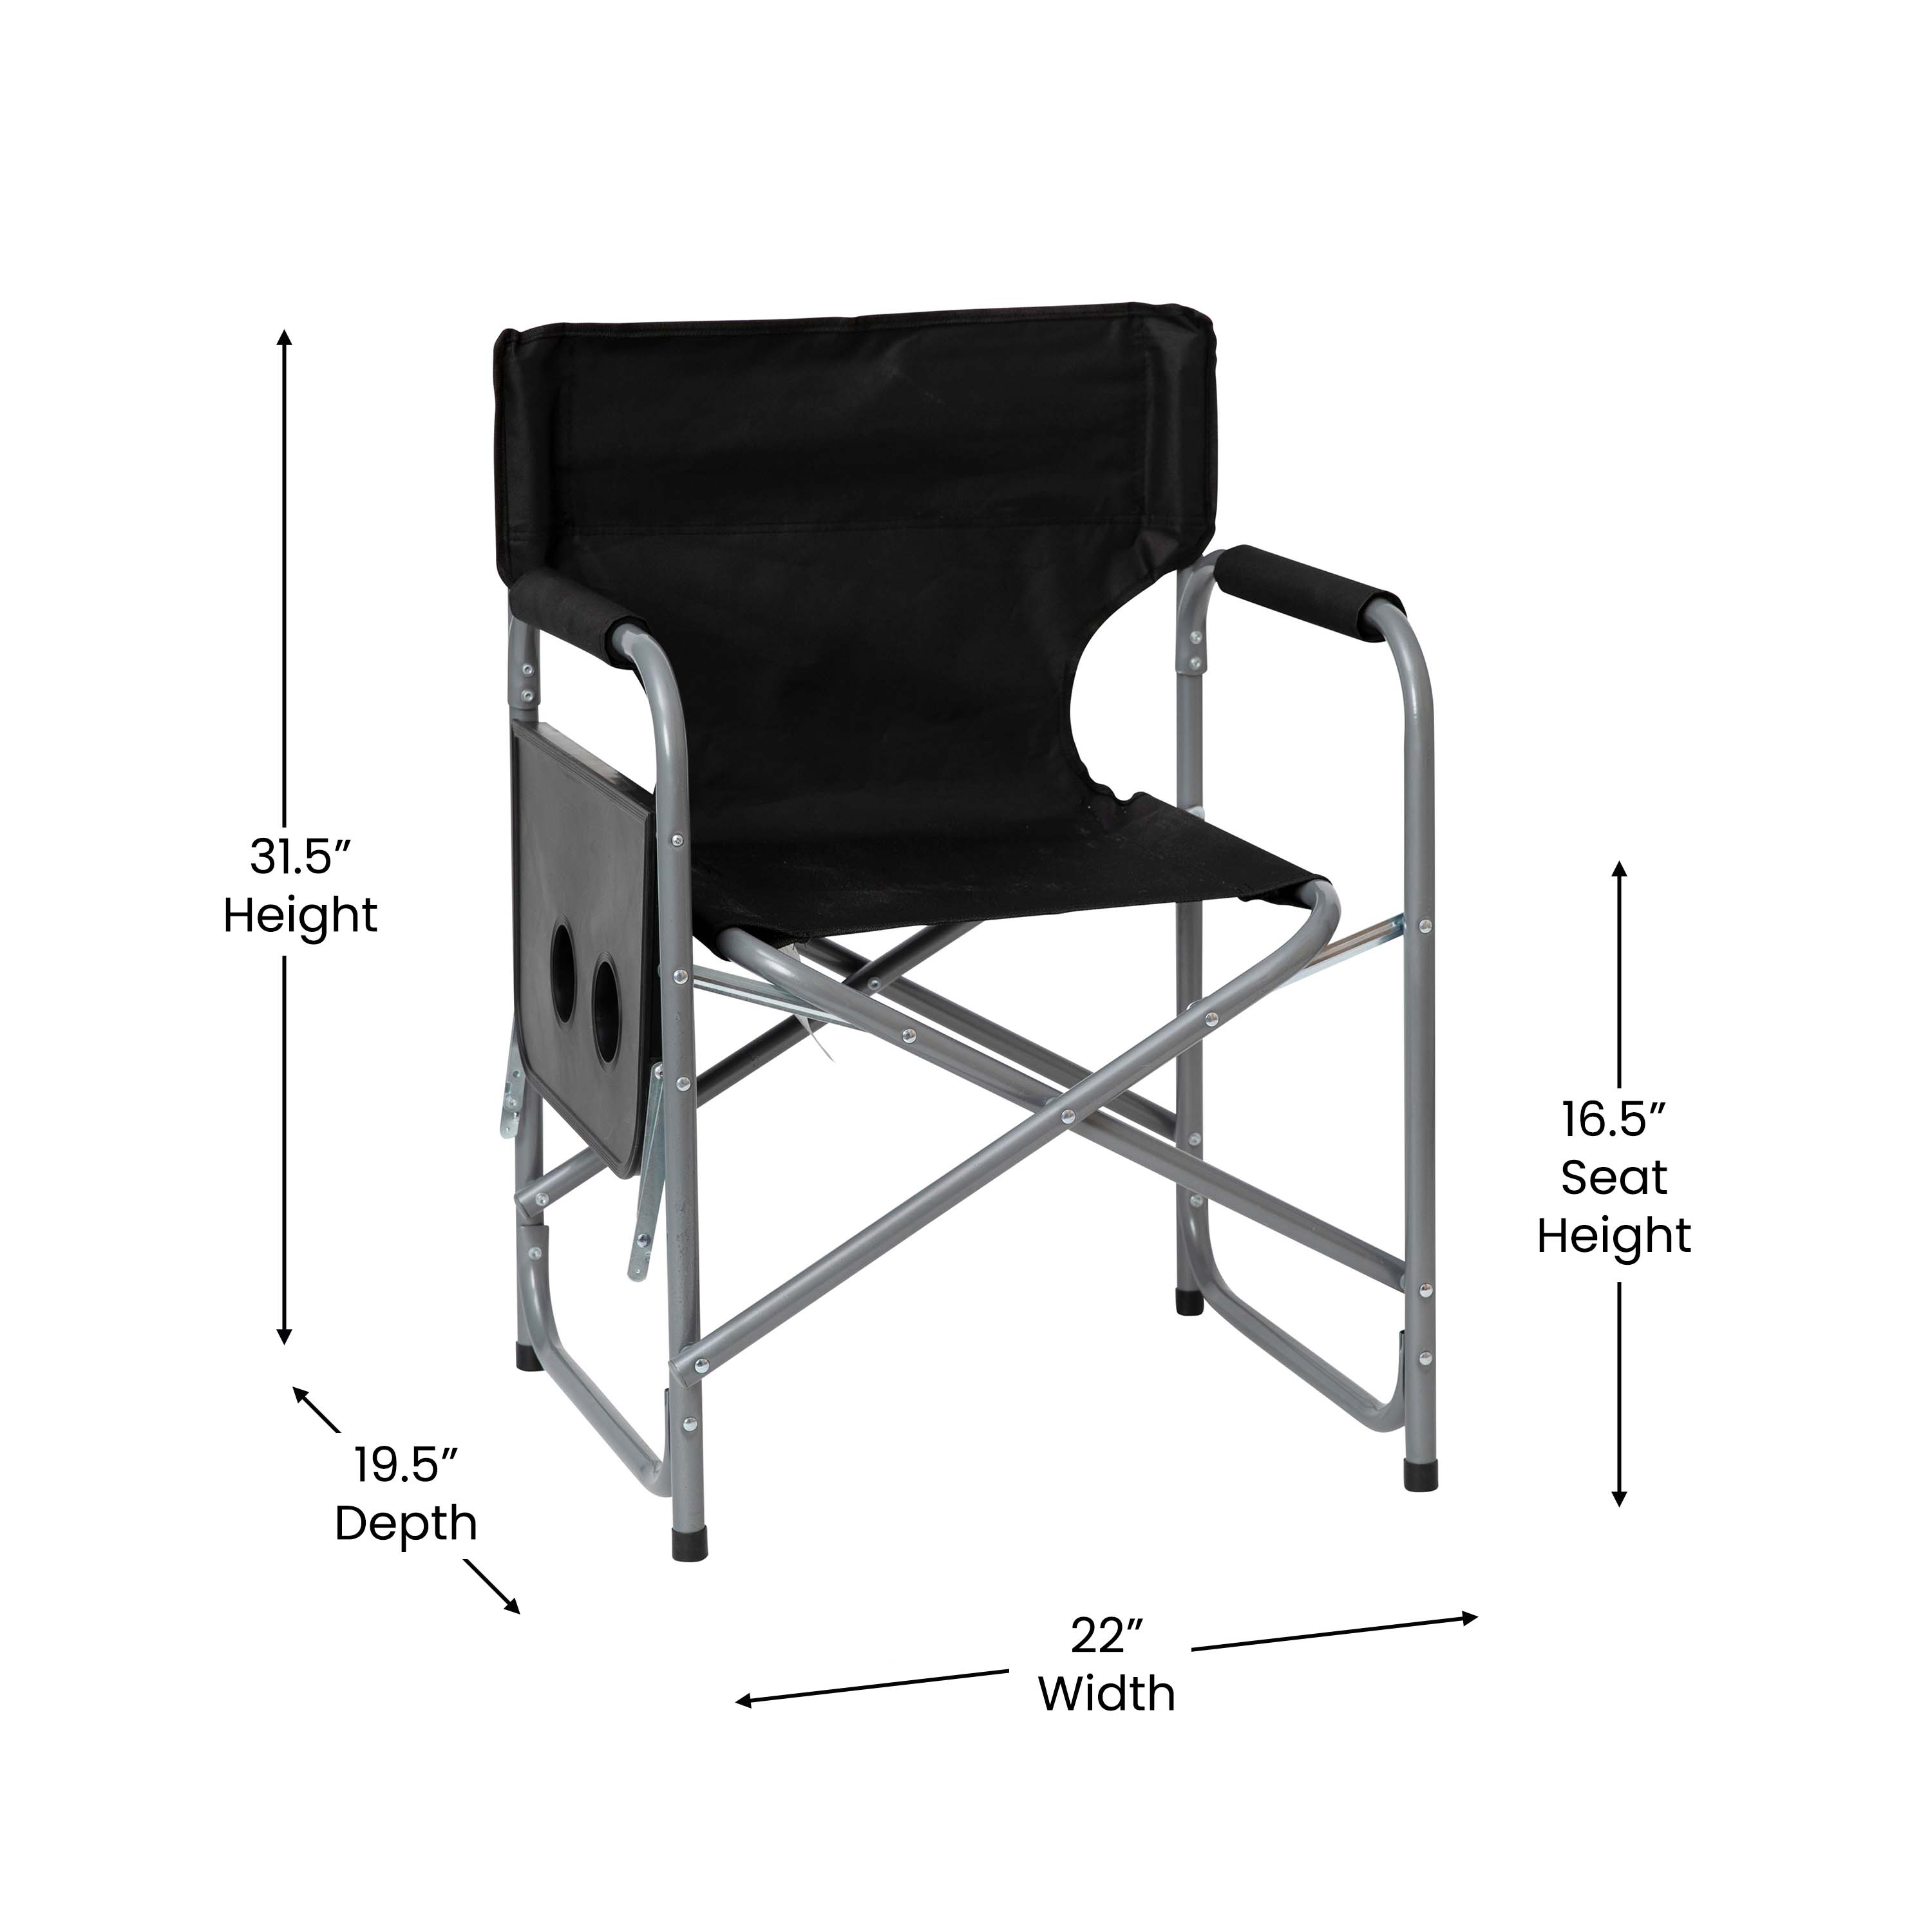 Emma + Oliver Black Canvas Folding Director's Chair with Gray Steel Tube Frame-Integrated Folding Side Table with Cupholders - image 5 of 12